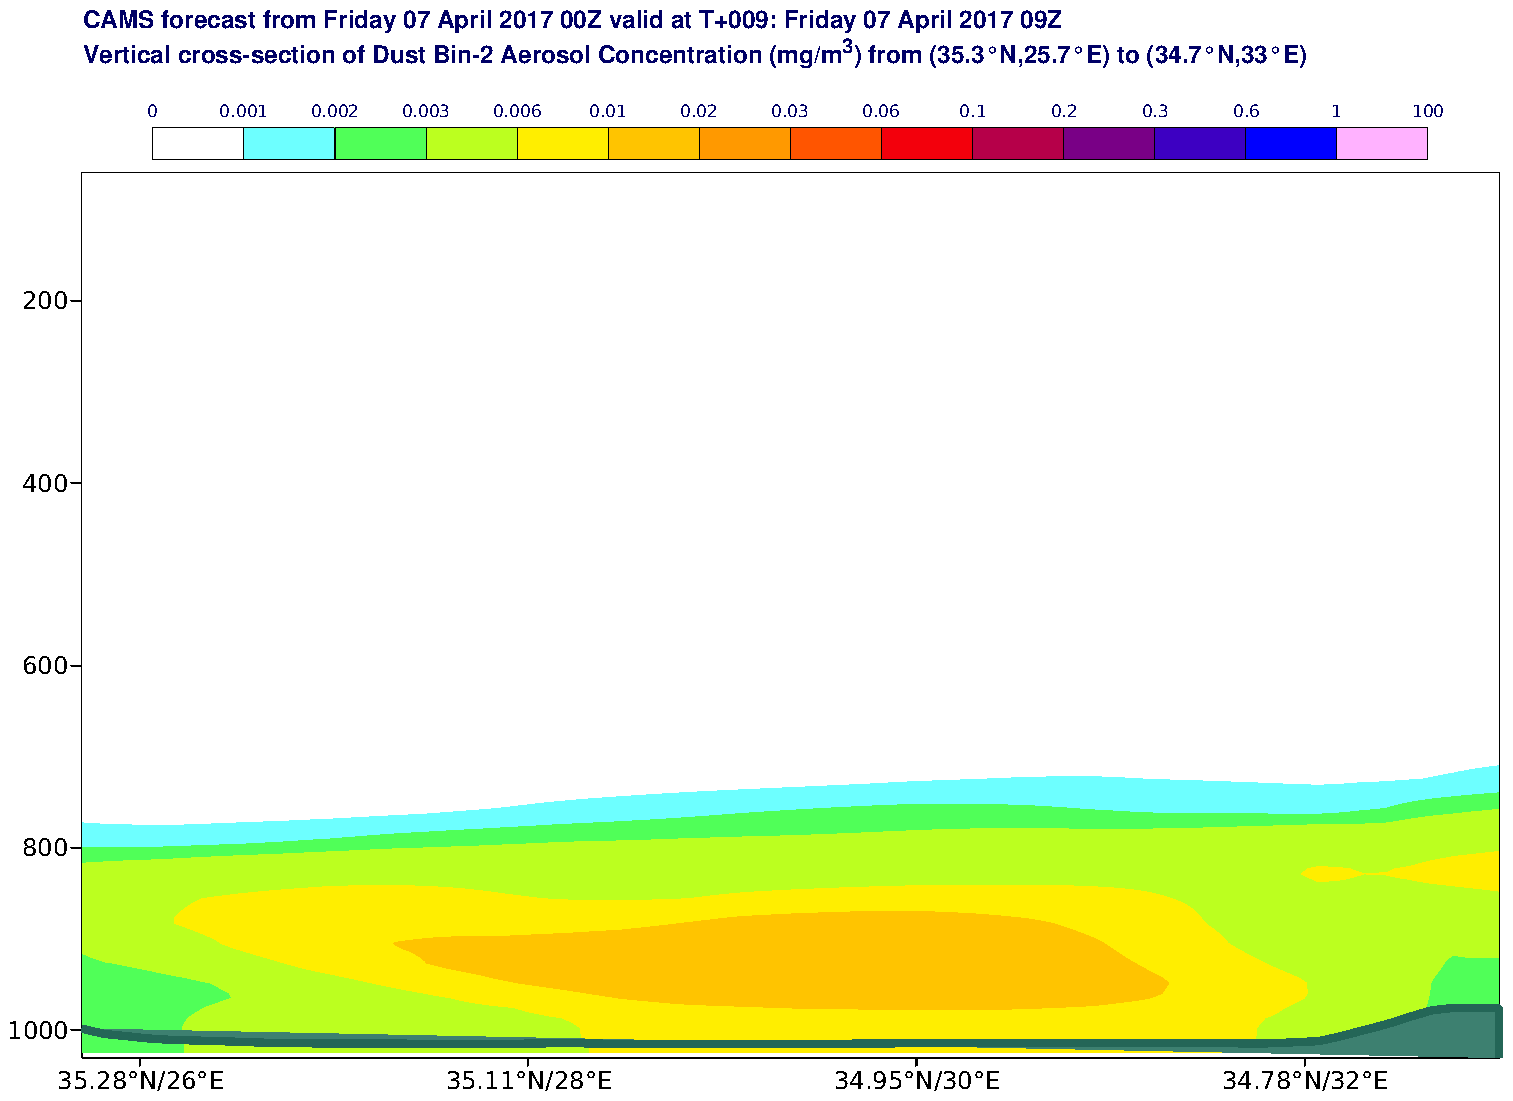 Vertical cross-section of Dust Bin-2 Aerosol Concentration (mg/m3) valid at T9 - 2017-04-07 09:00